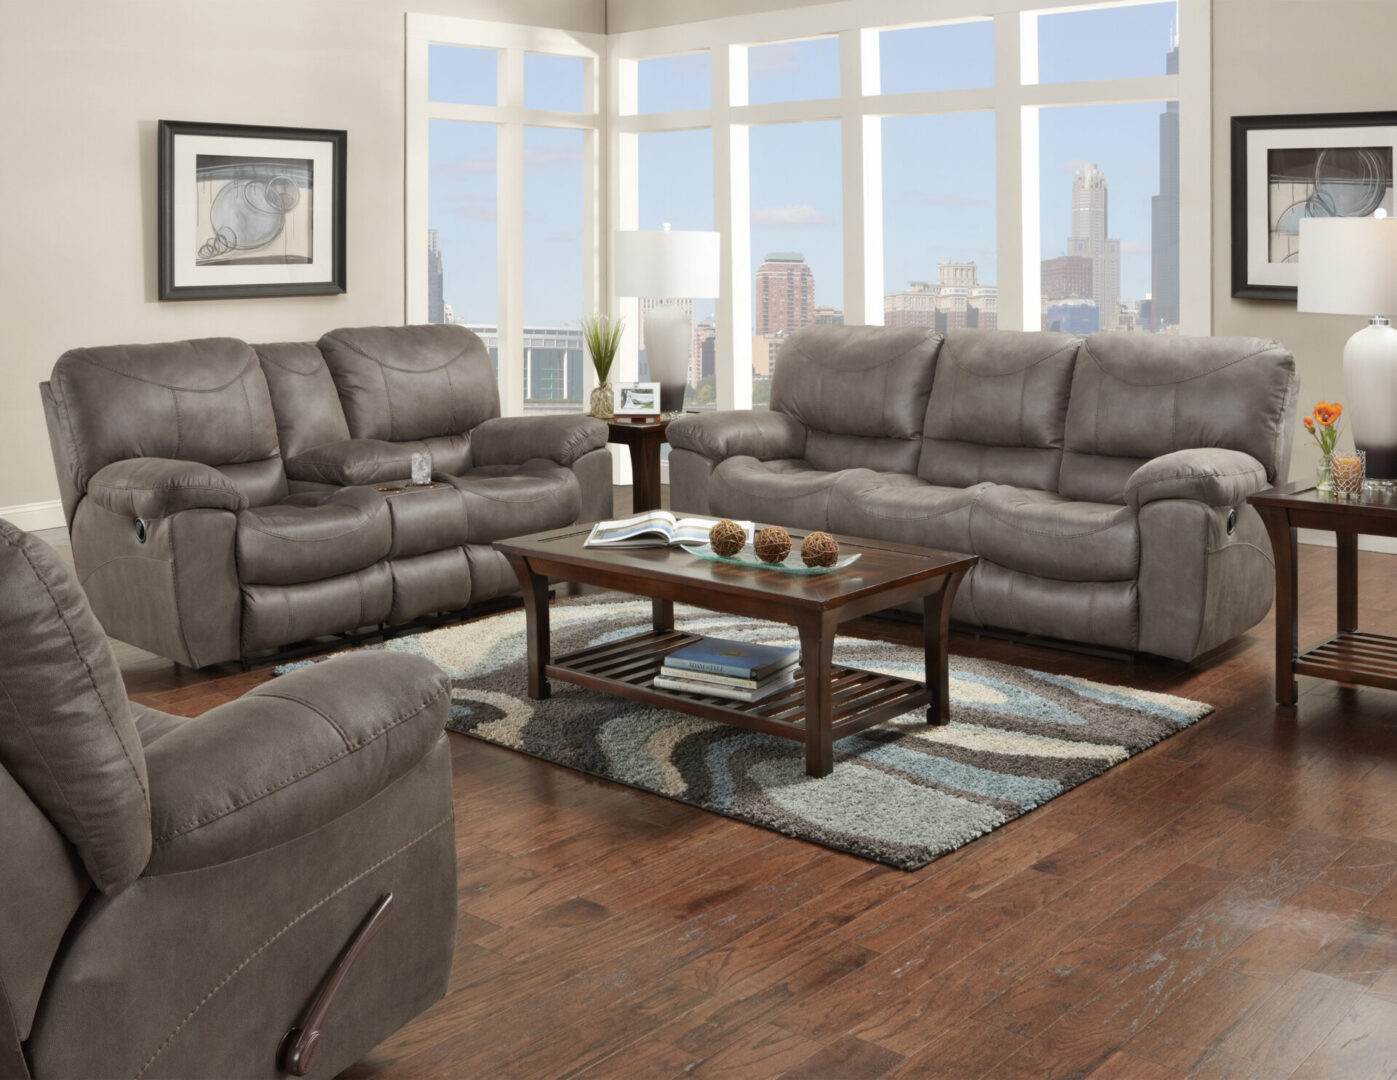 A living room with two couches and a table